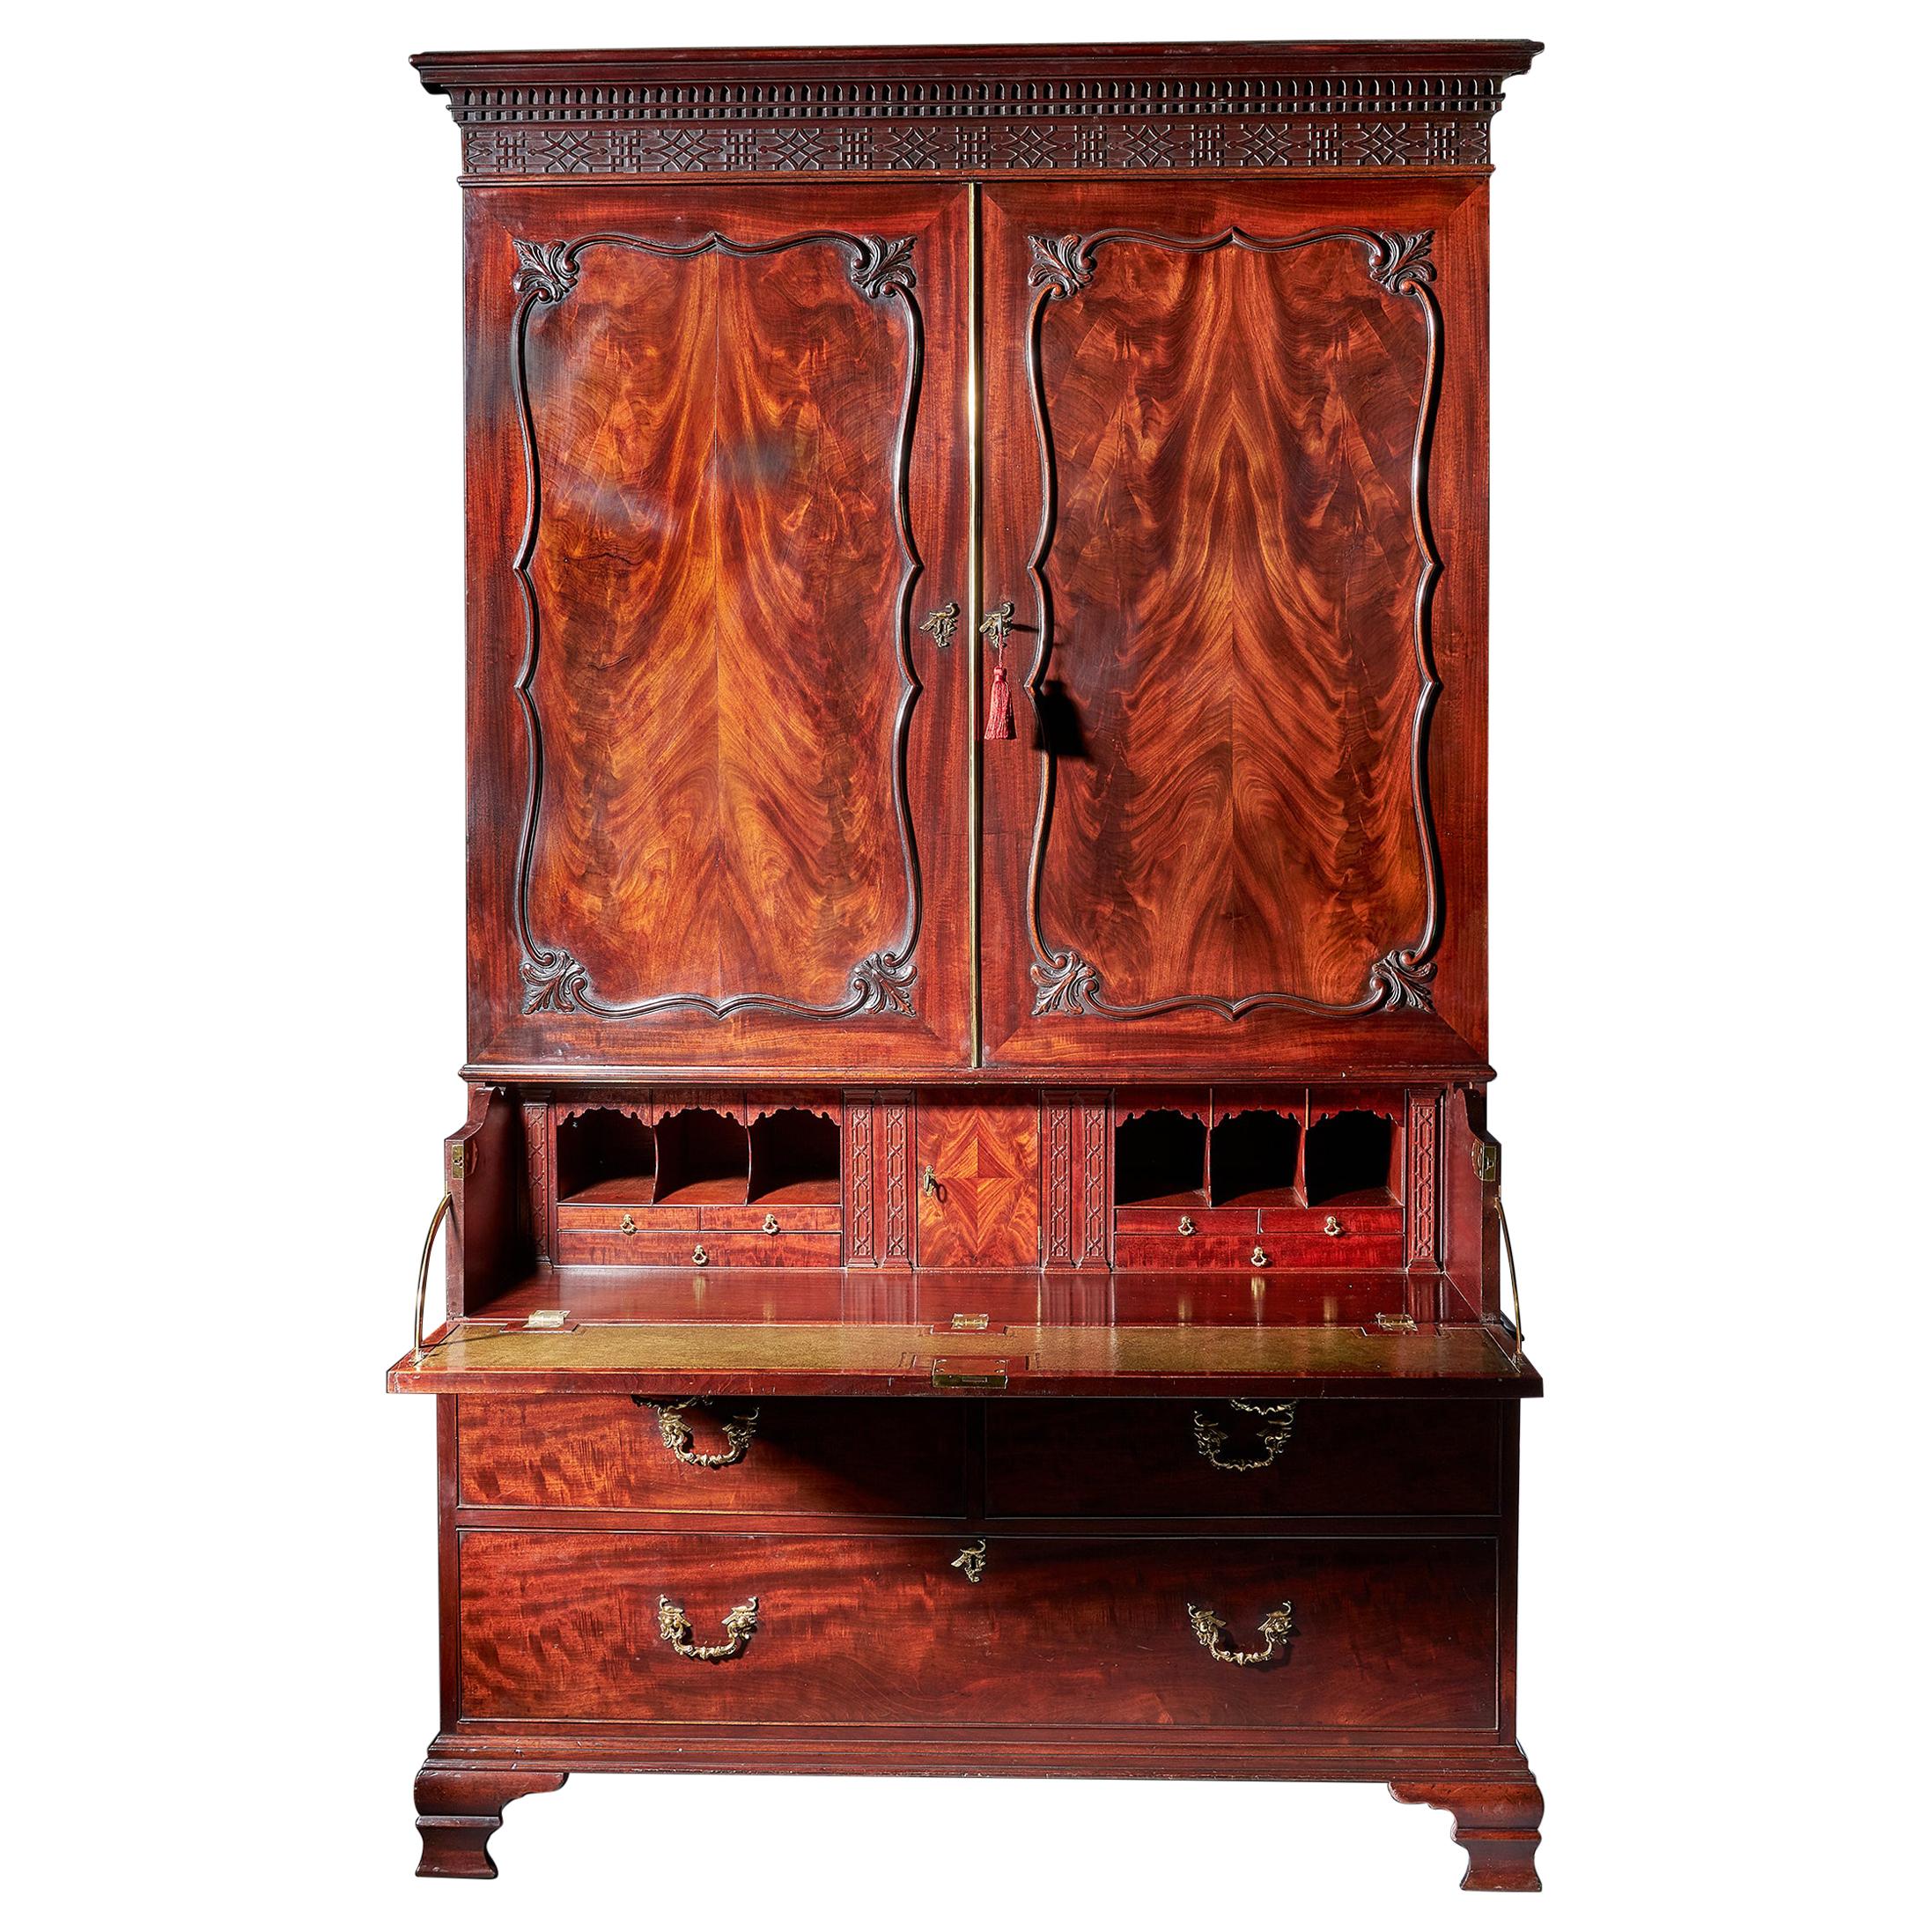 Important Documented 18th Century Linen Press by Gillows of Lancaster and London